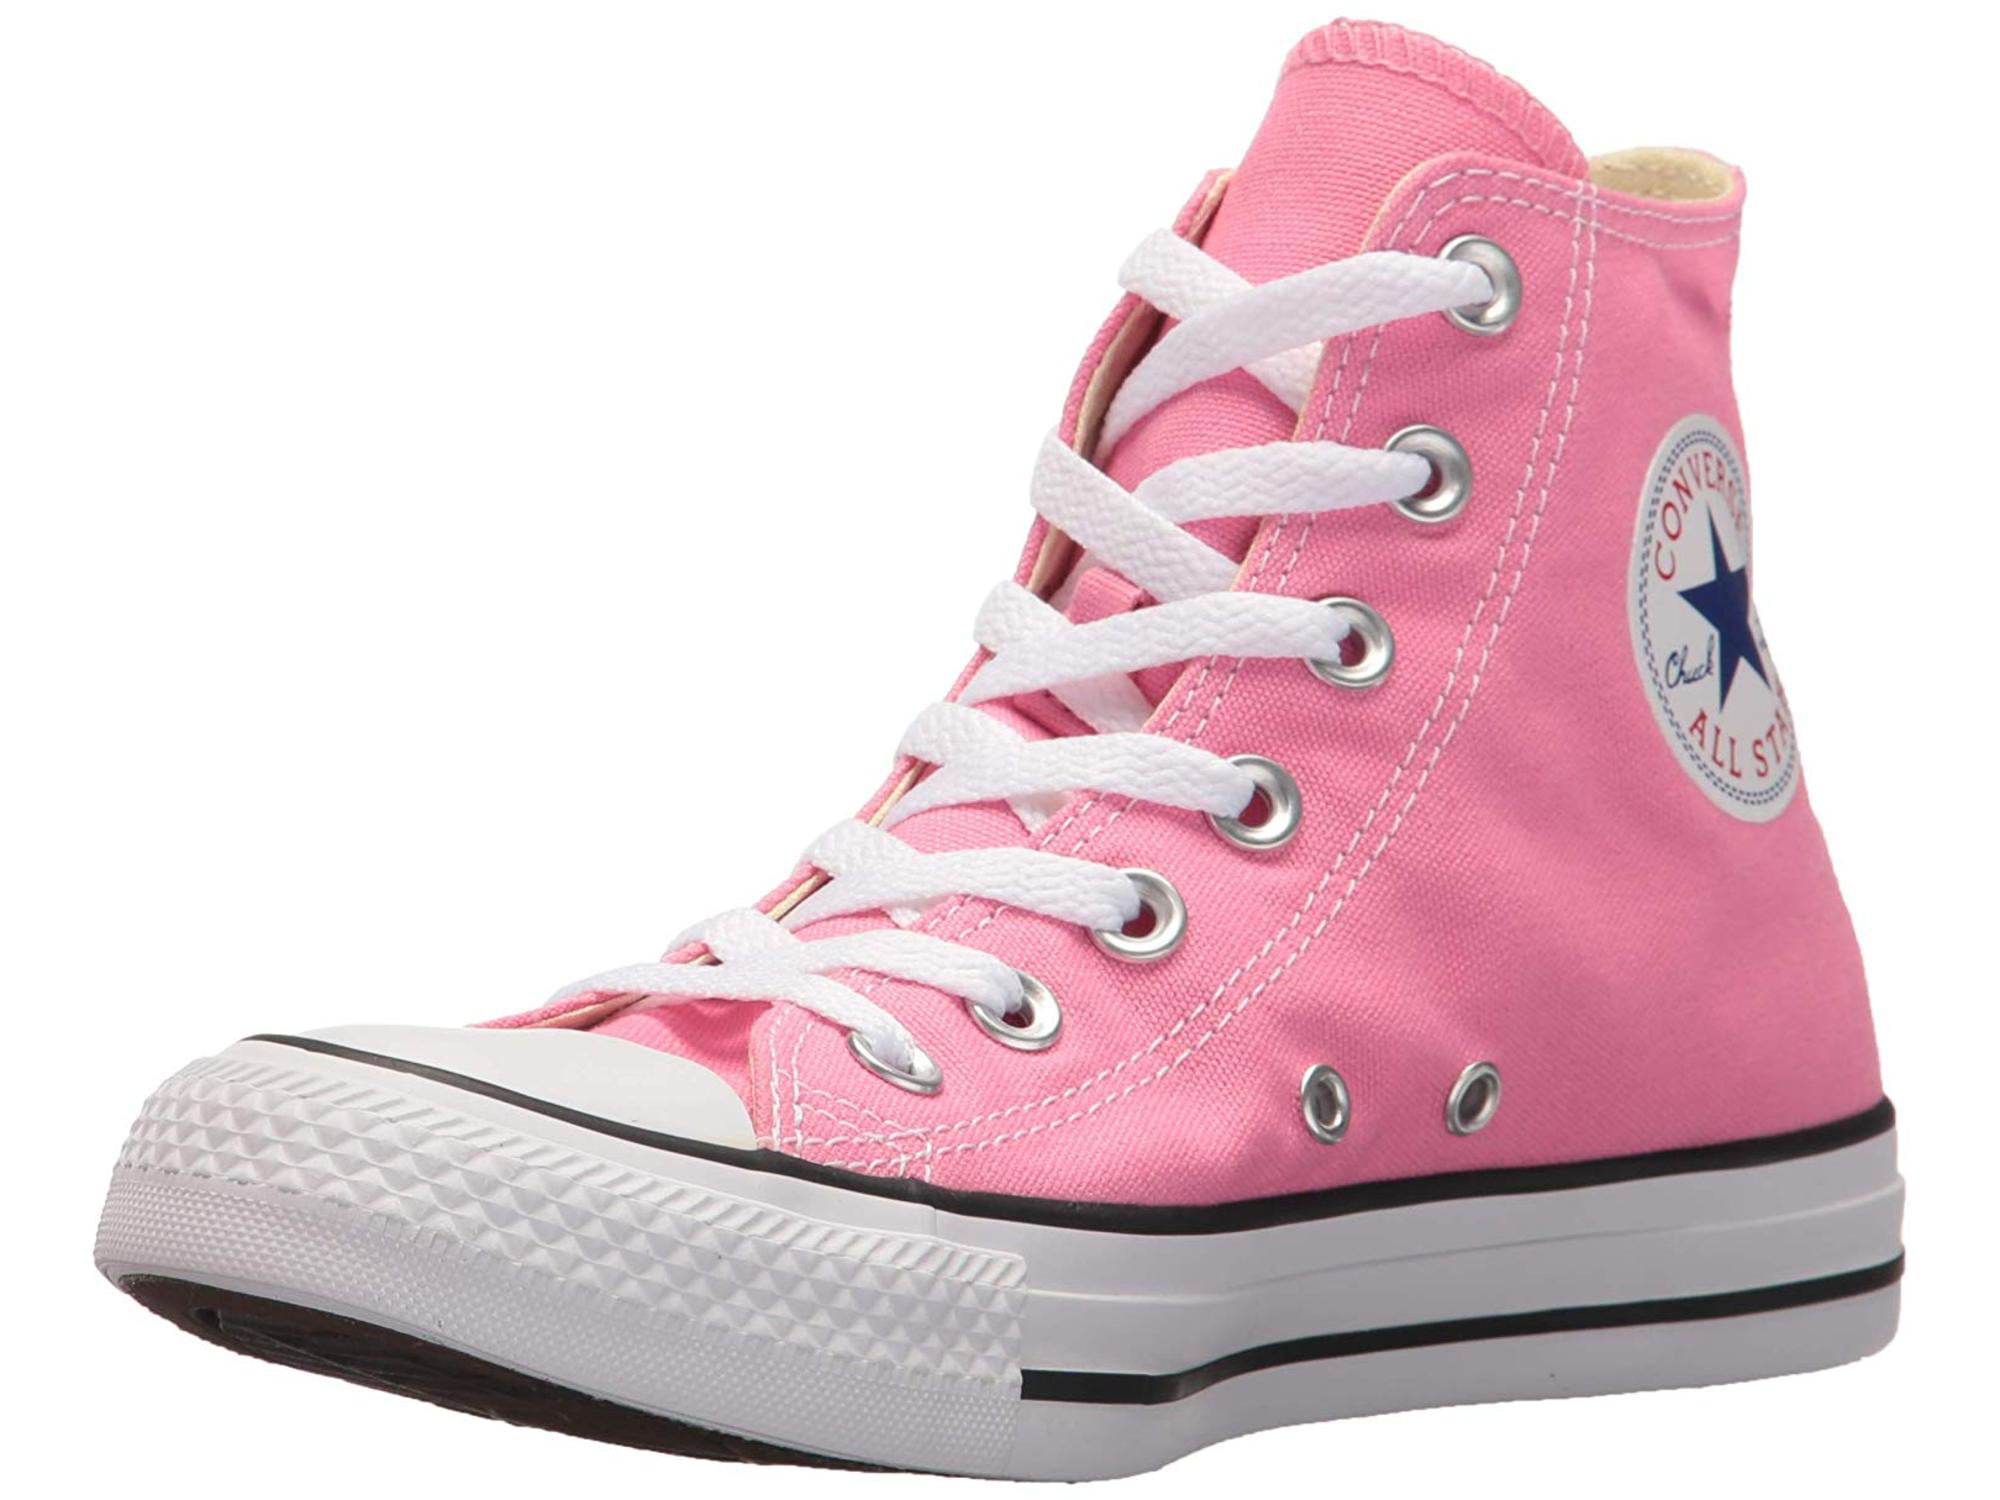 pale pink converse womens